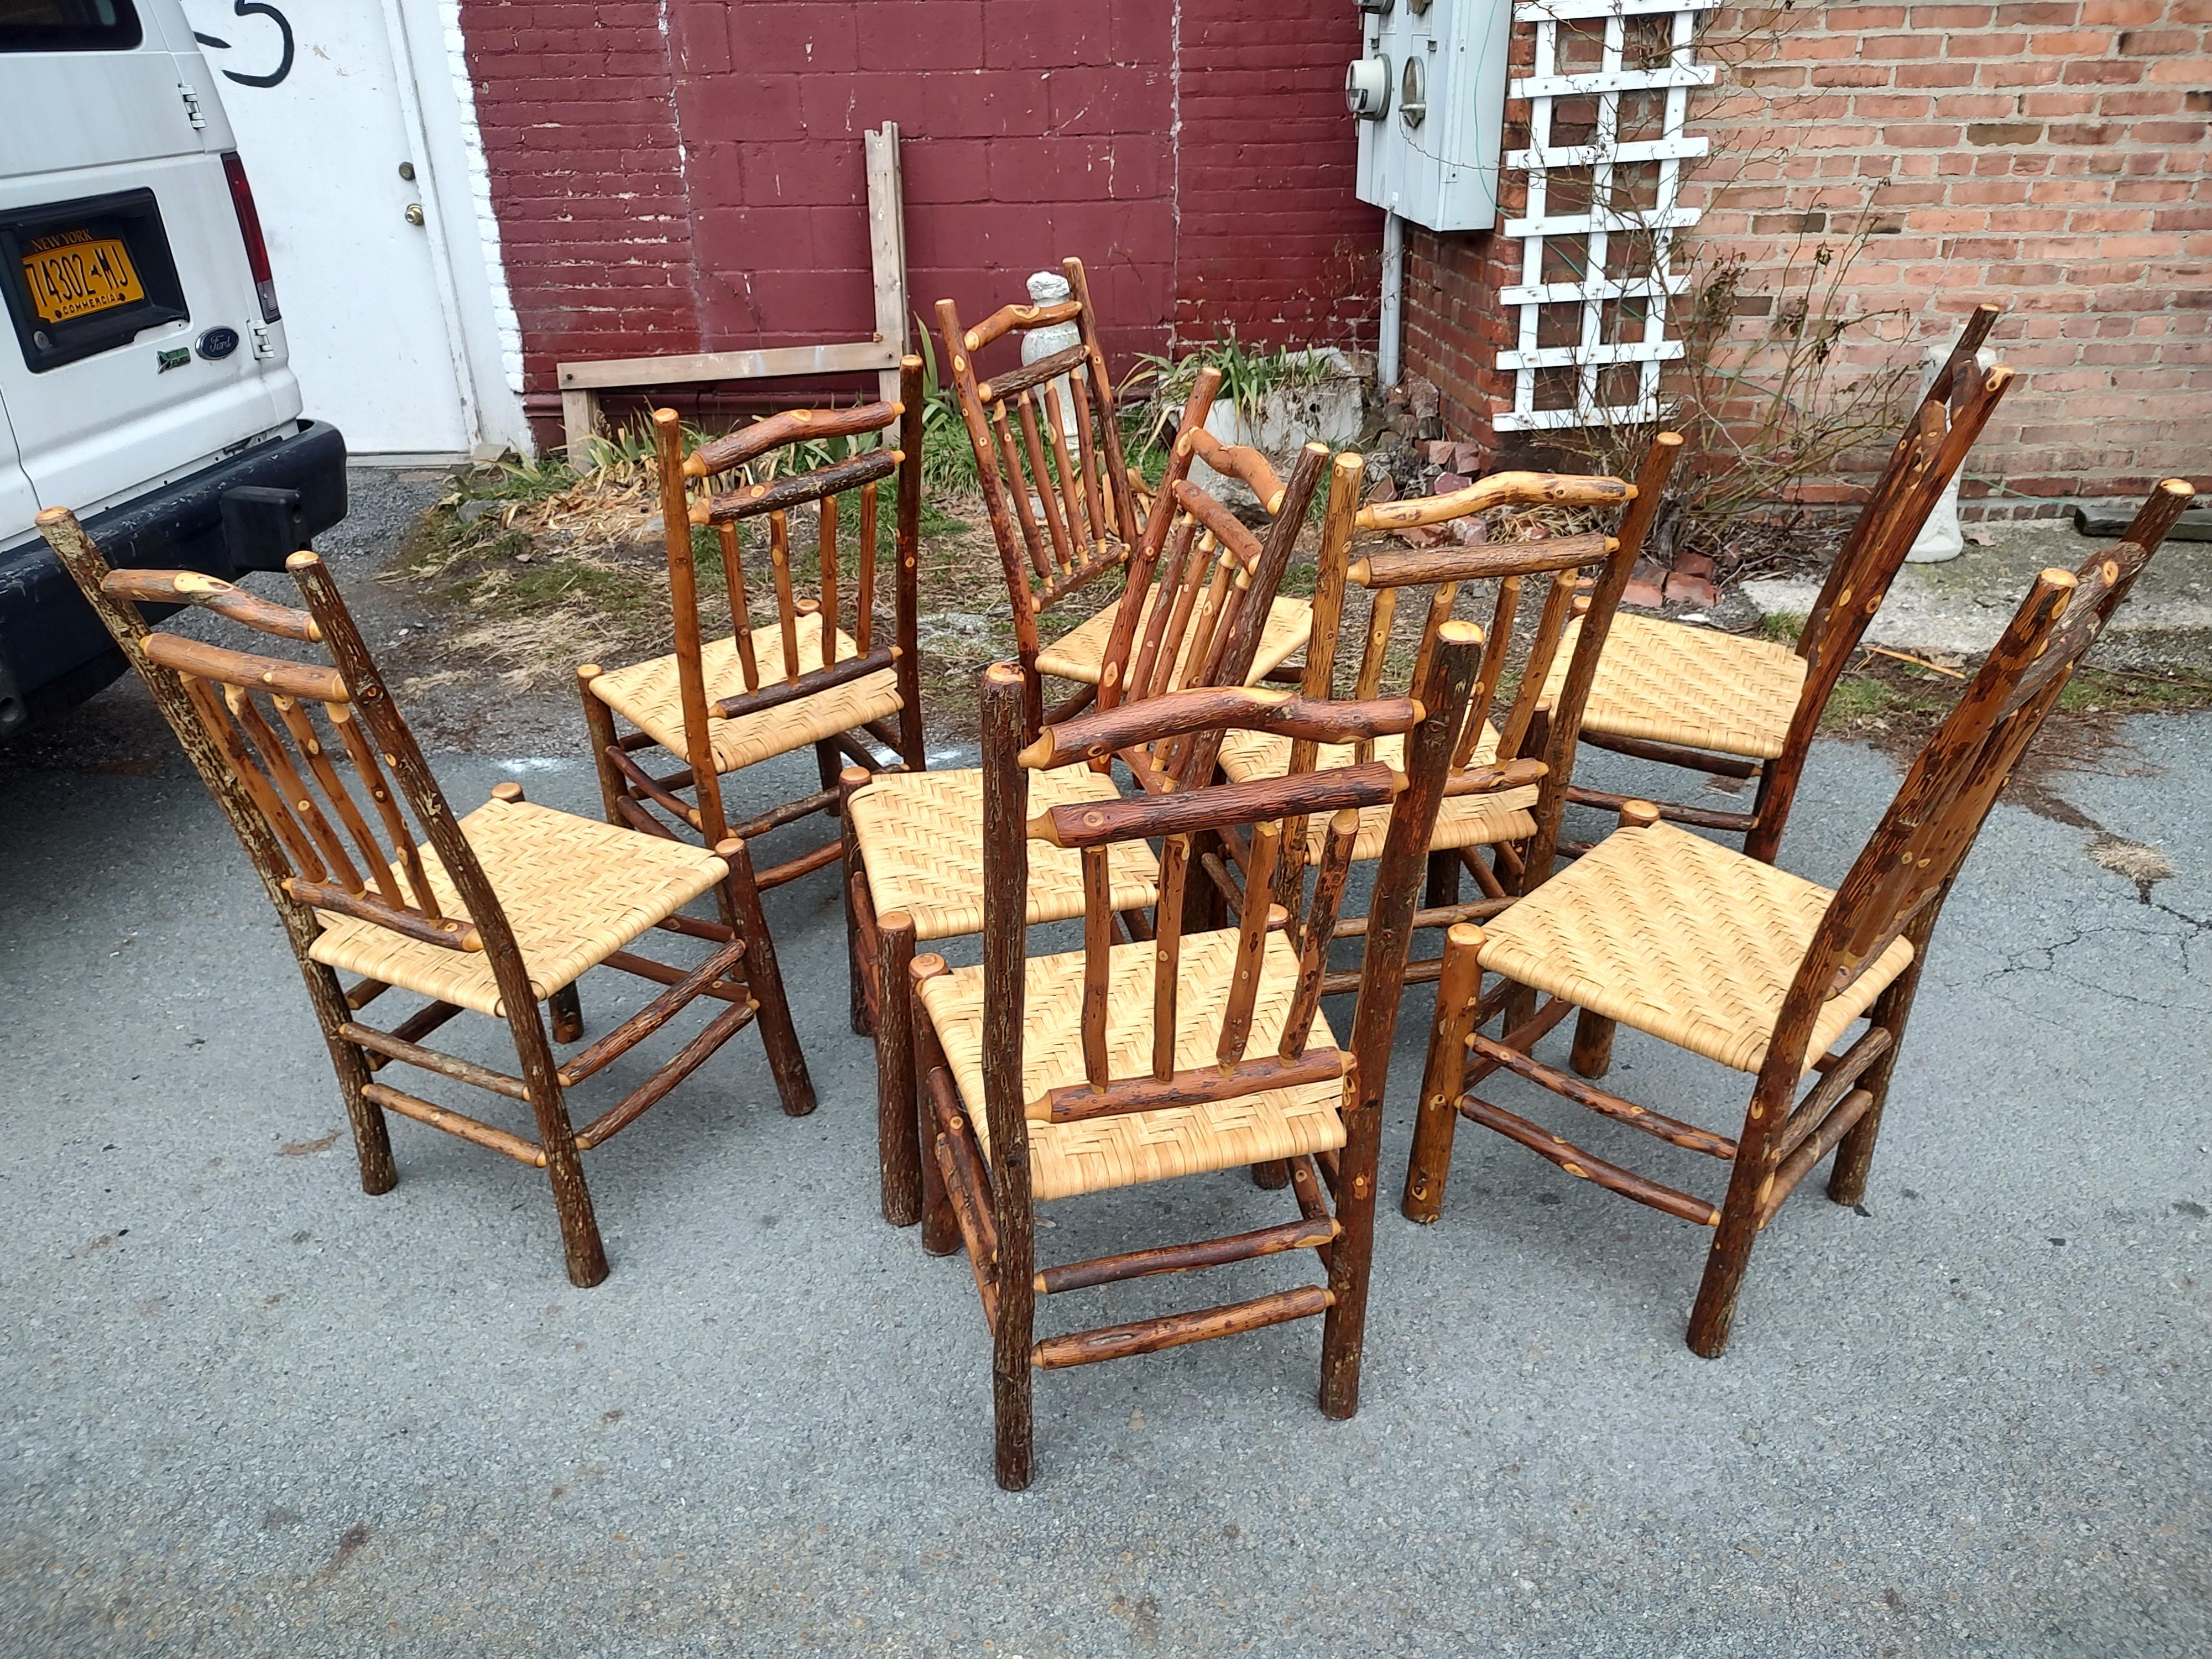 Hand-Carved Set of 8 Old Hickory Style Adirondack Dining Chairs with Woven Seats & Cushions